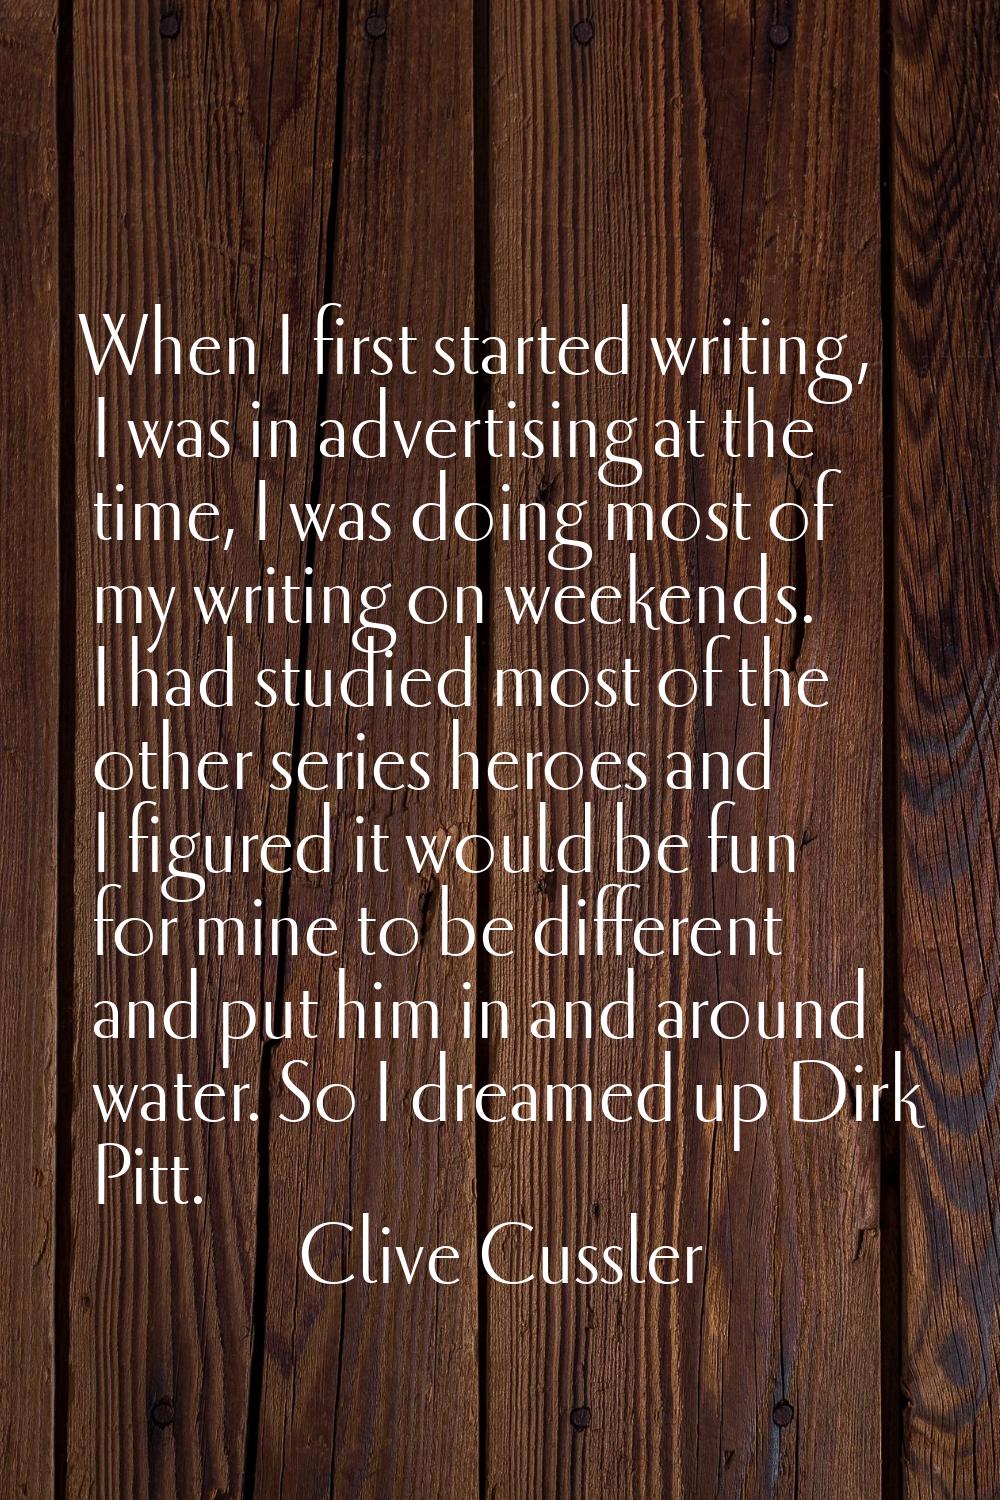 When I first started writing, I was in advertising at the time, I was doing most of my writing on w